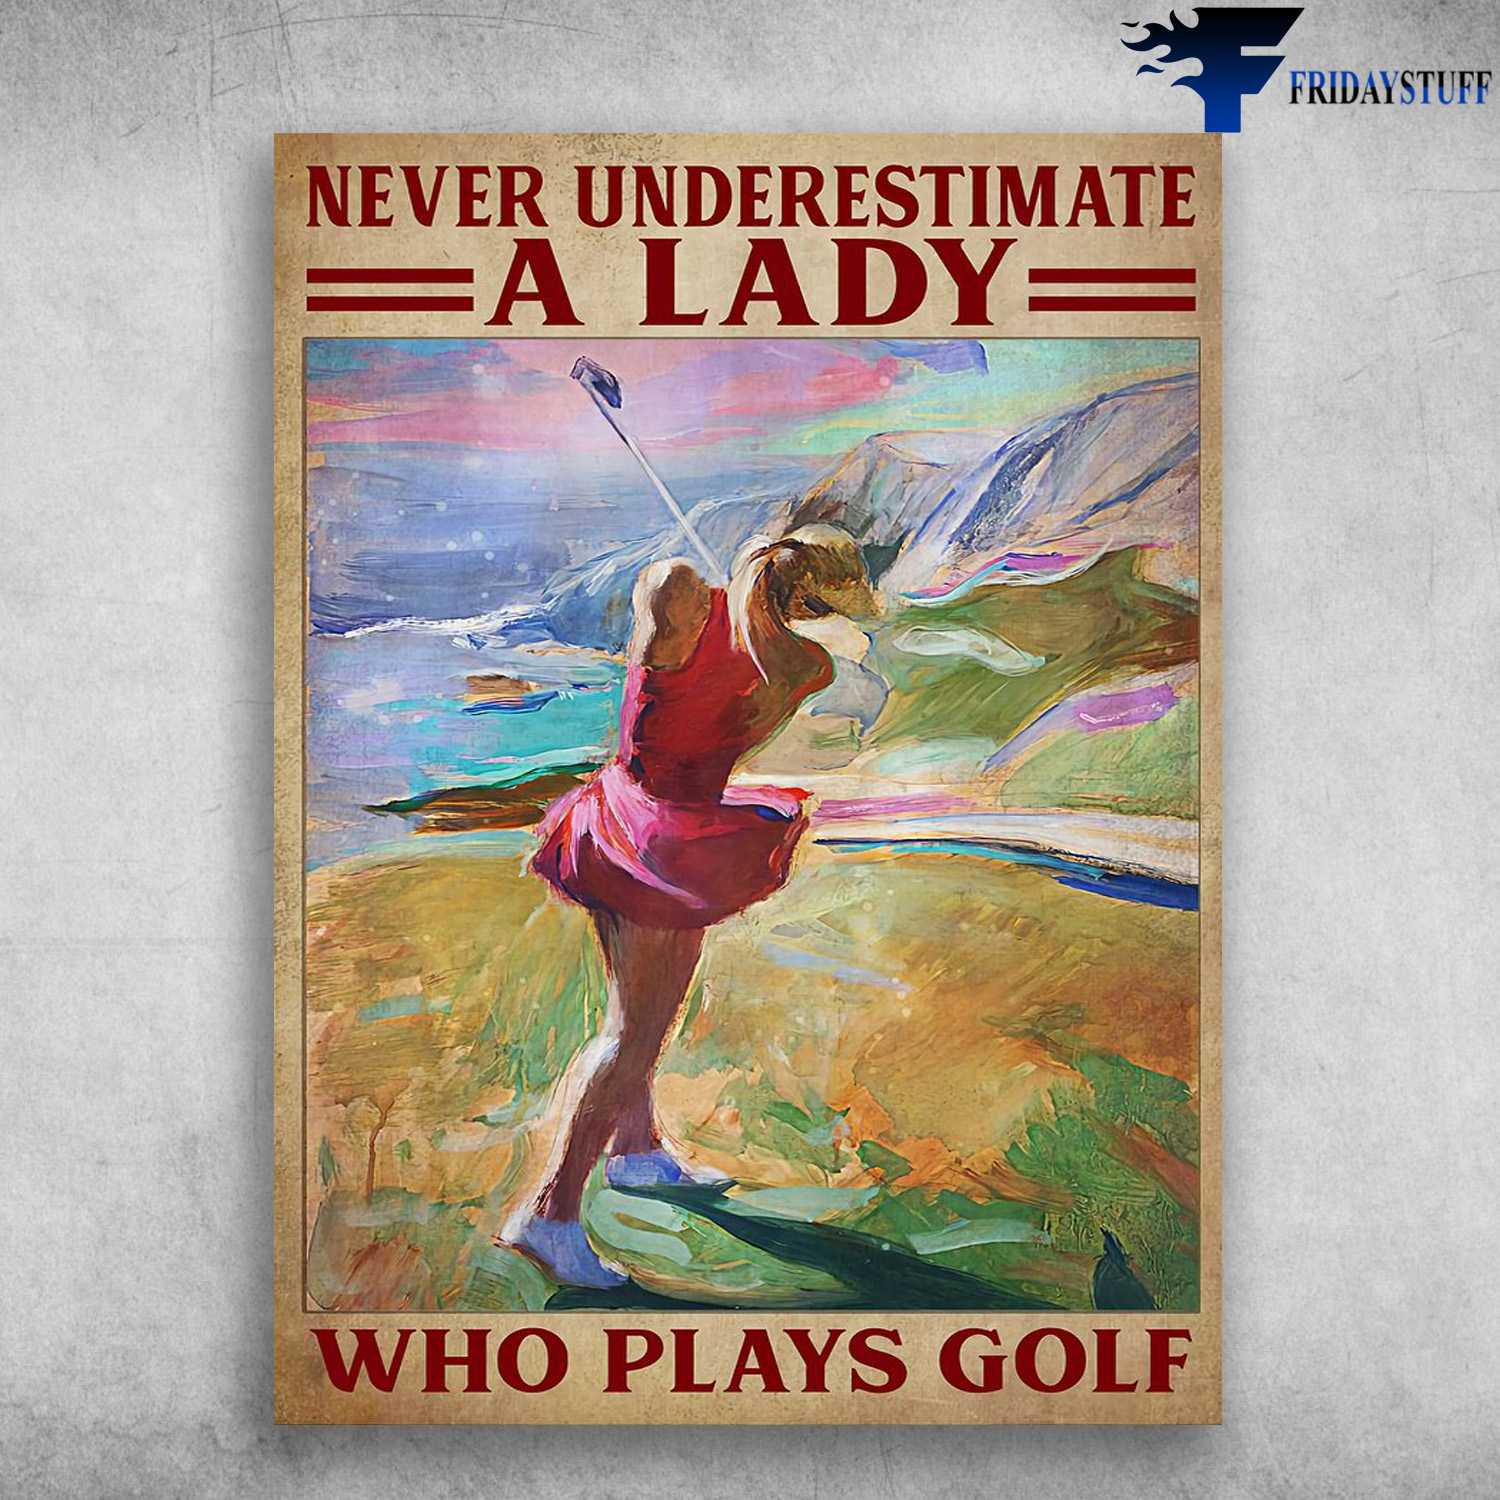 Golf Poster, Girl Plays Golf - Never Underestimate A Lady, Who Plays Golf